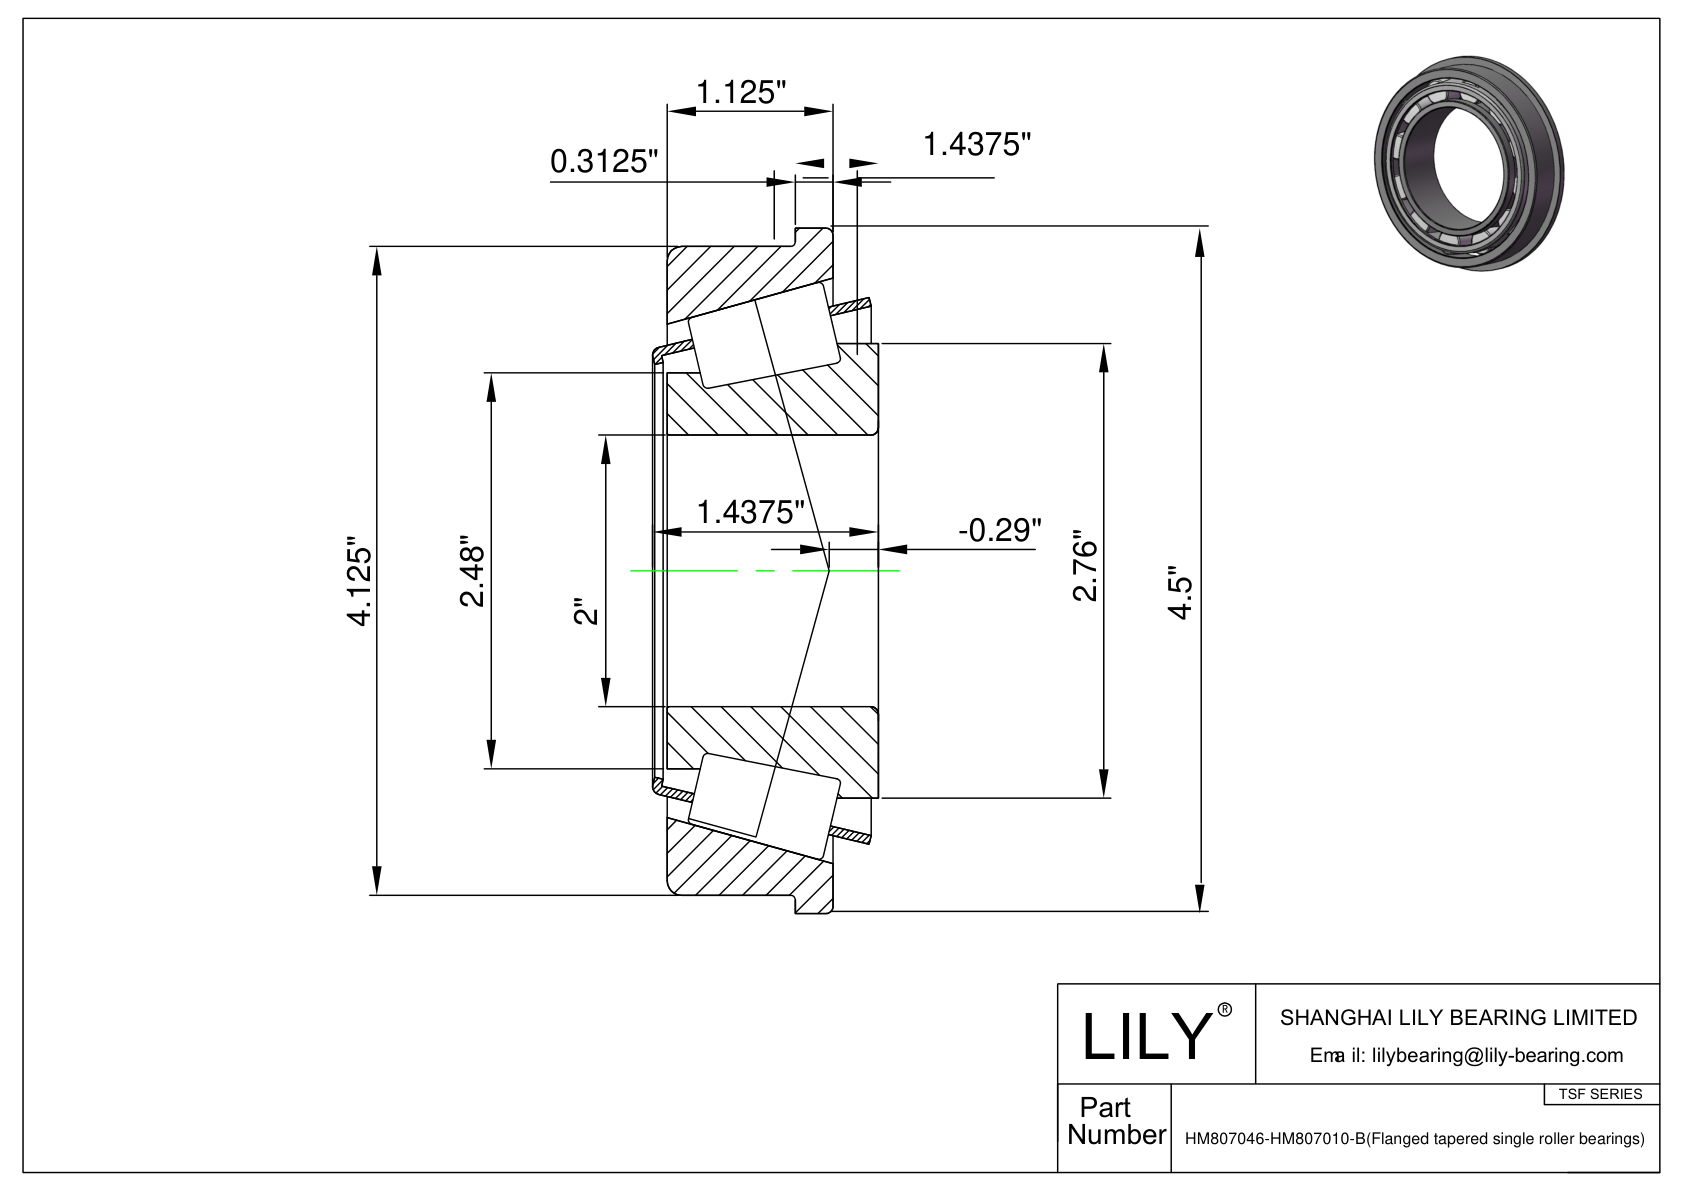 HM807046-HM807010-B TSF (Tapered Single Roller Bearings with Flange) (Imperial) cad drawing